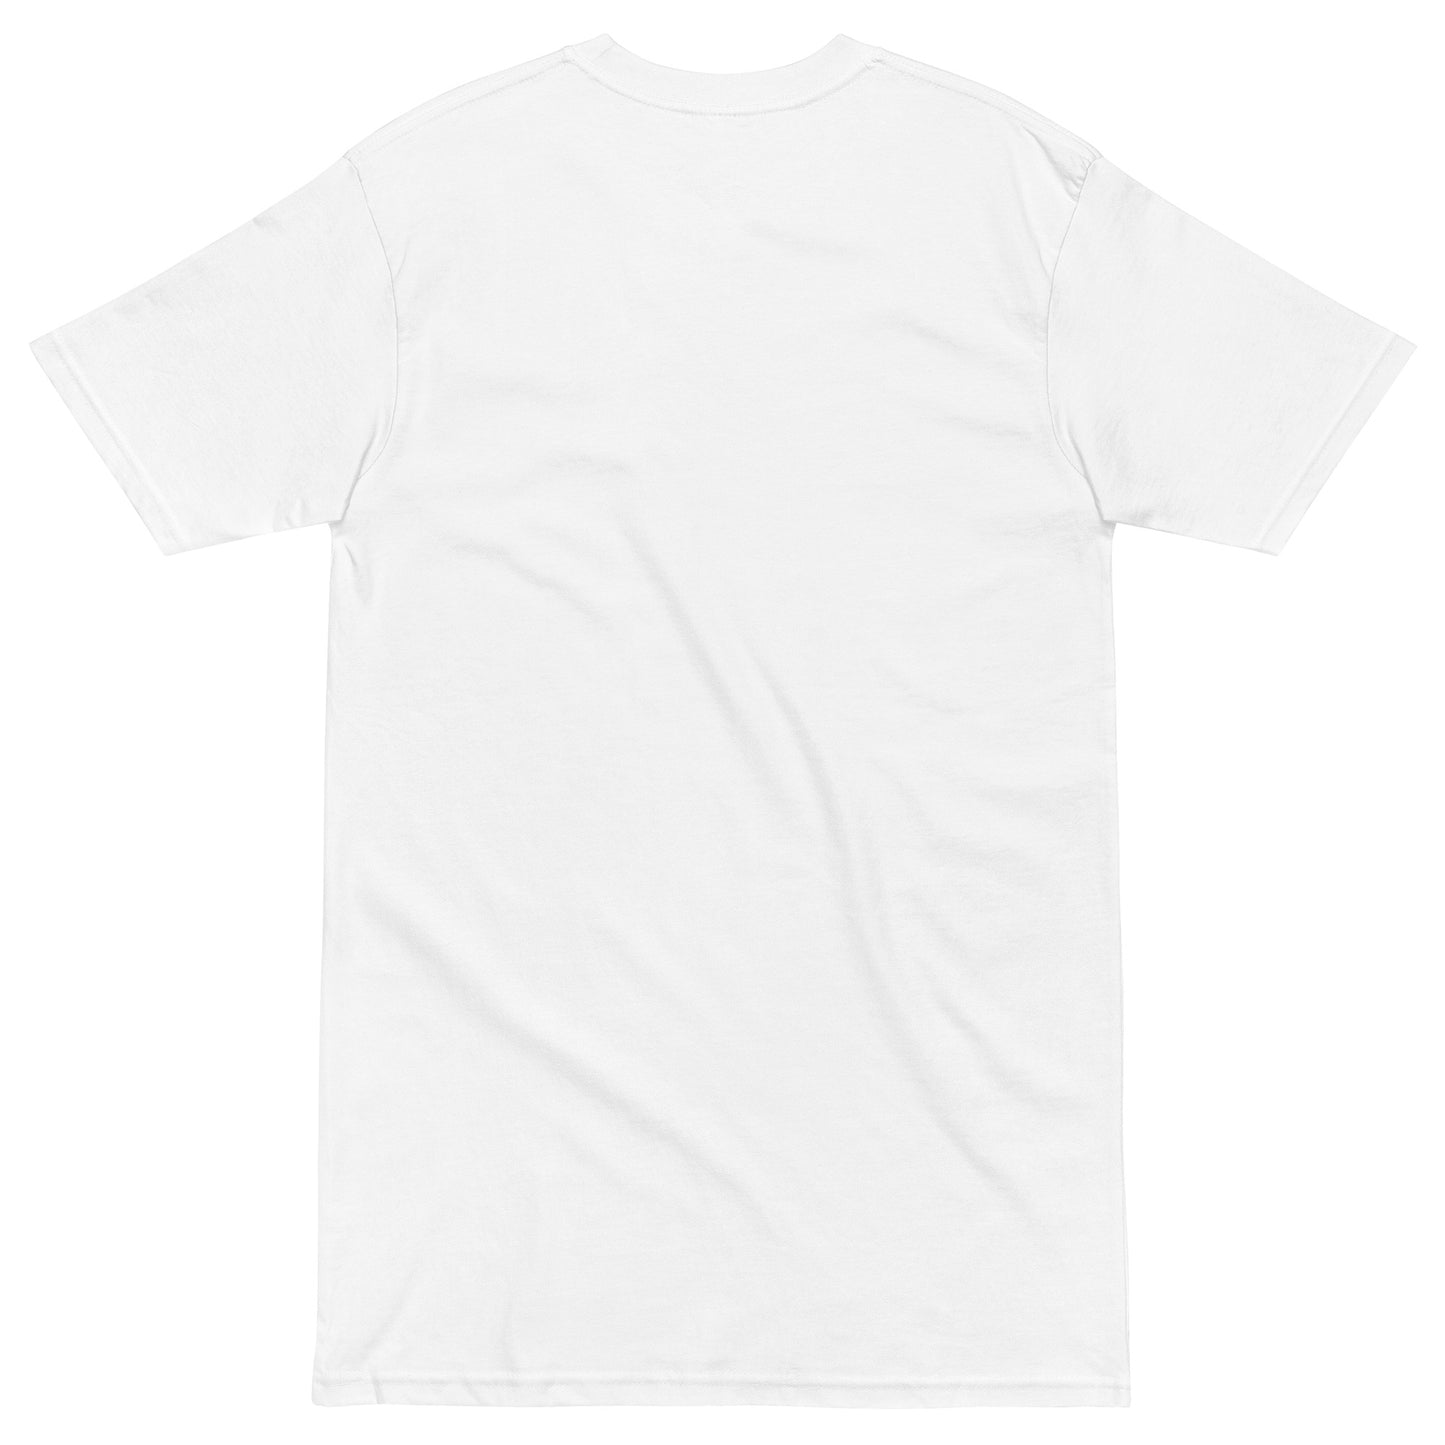 Never Alone T-Shirt